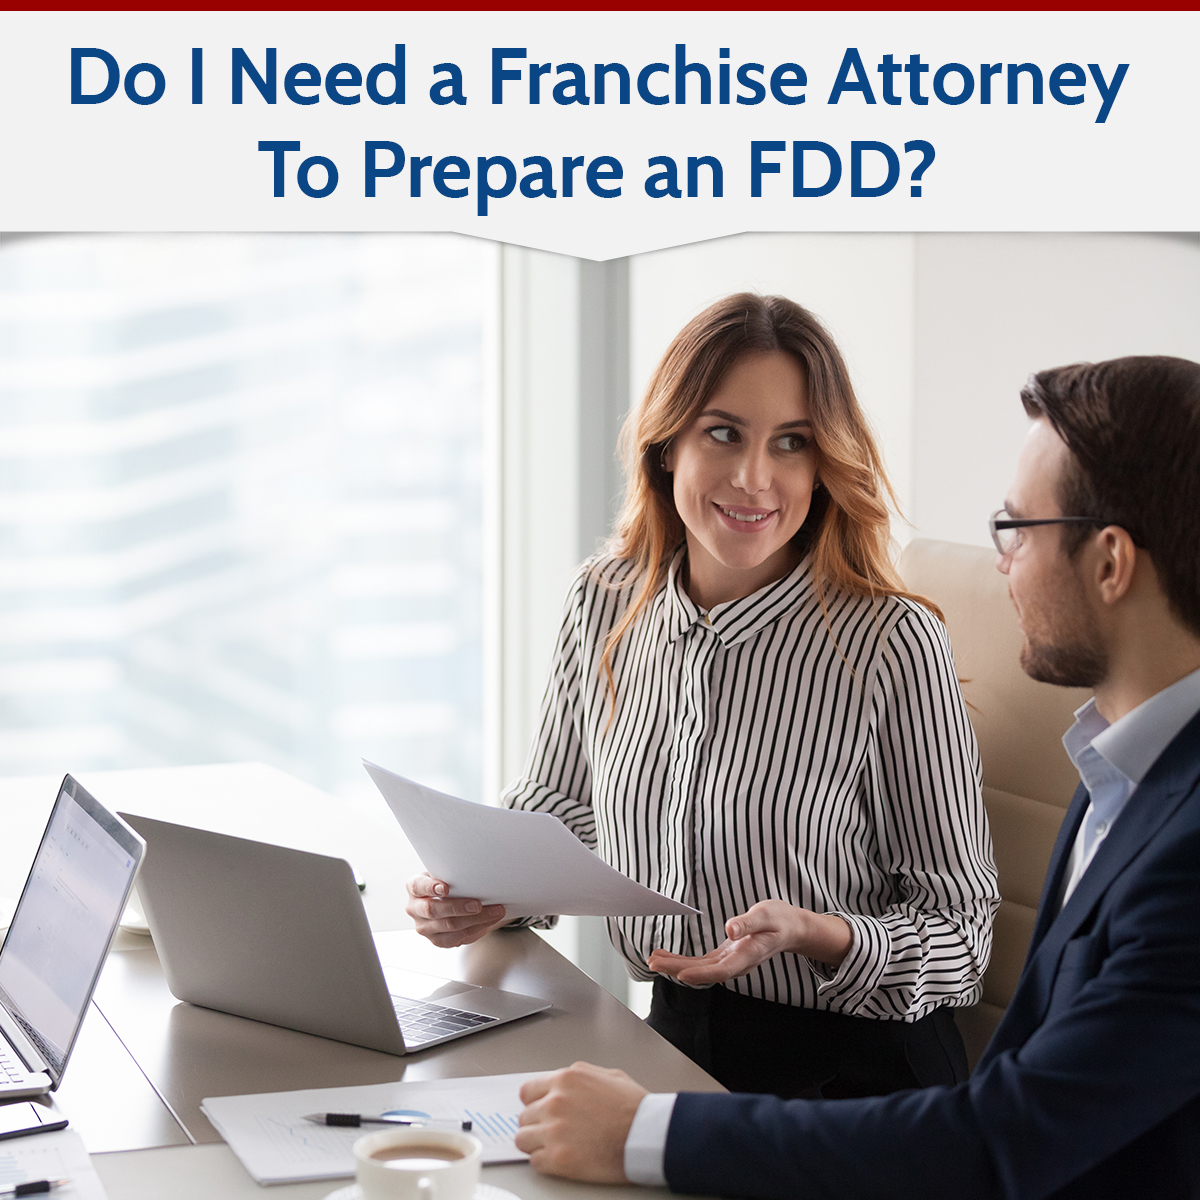 Do I Need a Franchise Attorney To Prepare an FDD?